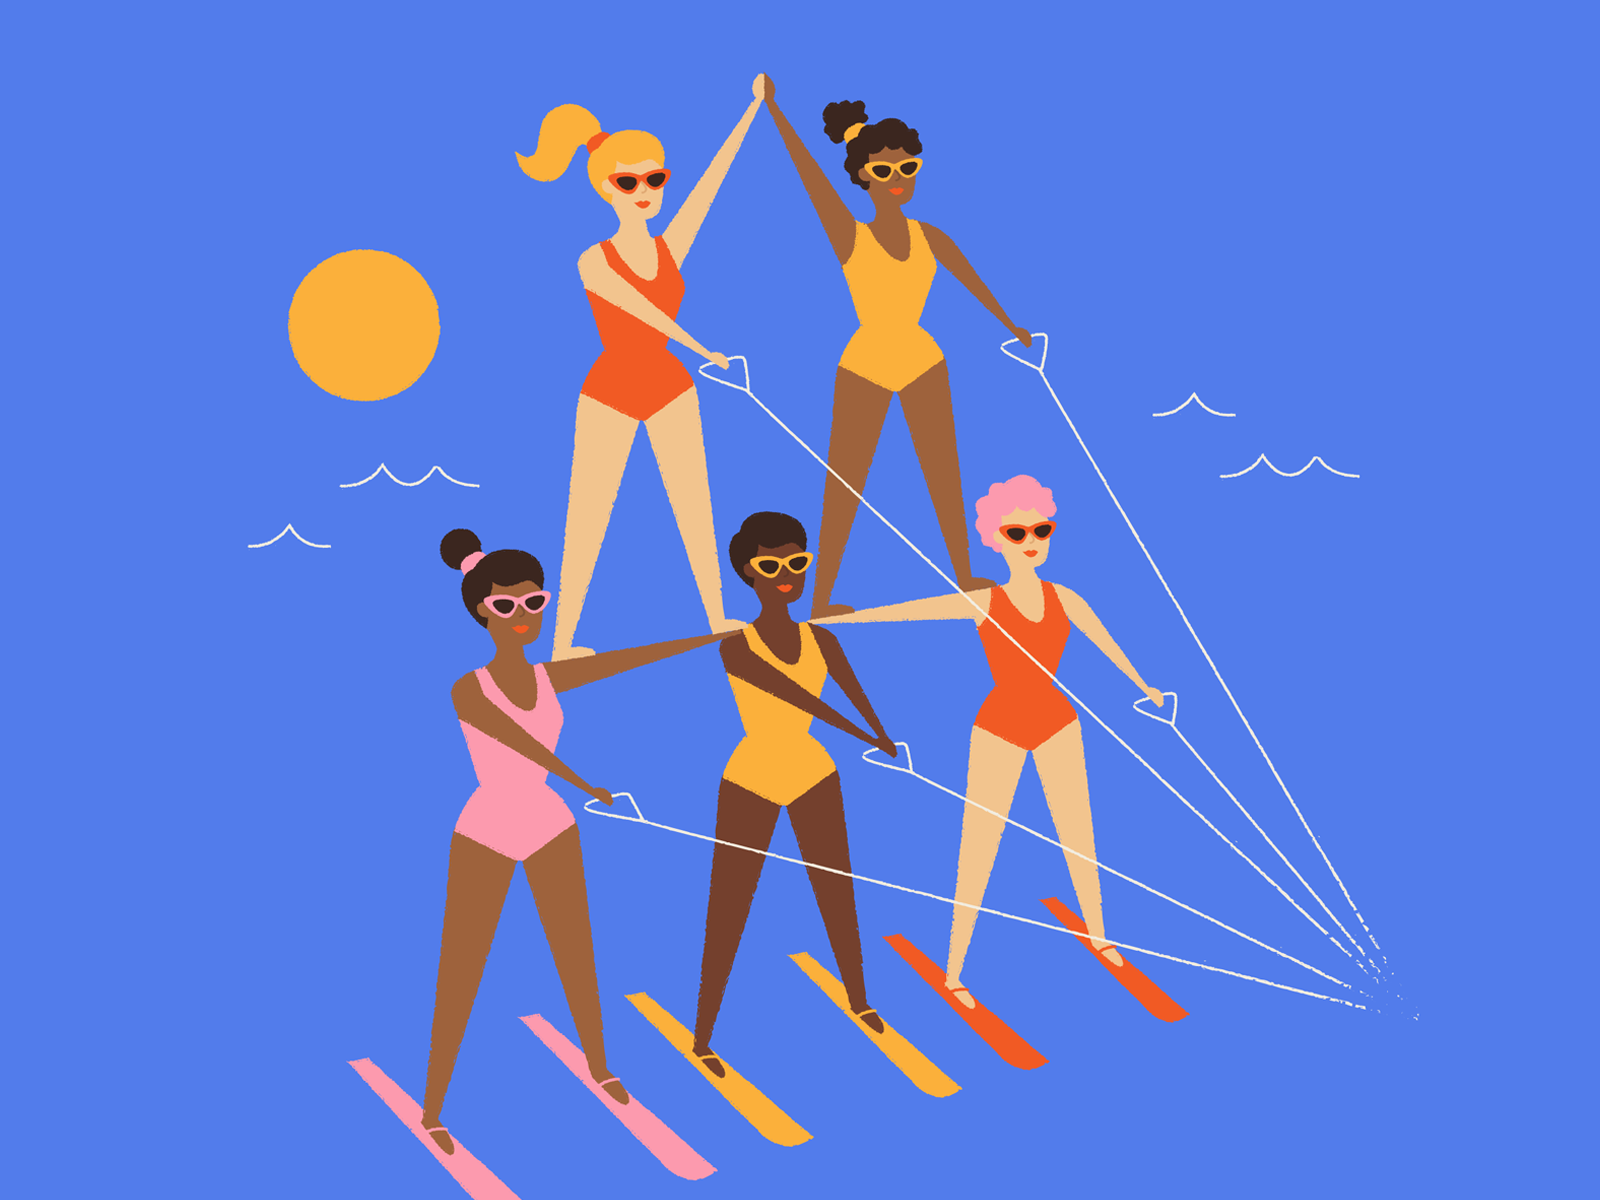 Ladies supporting each other in 2019 character art elevate feminism illustration ladies summer sunglasses support swimsuit team teamwork water skiing women